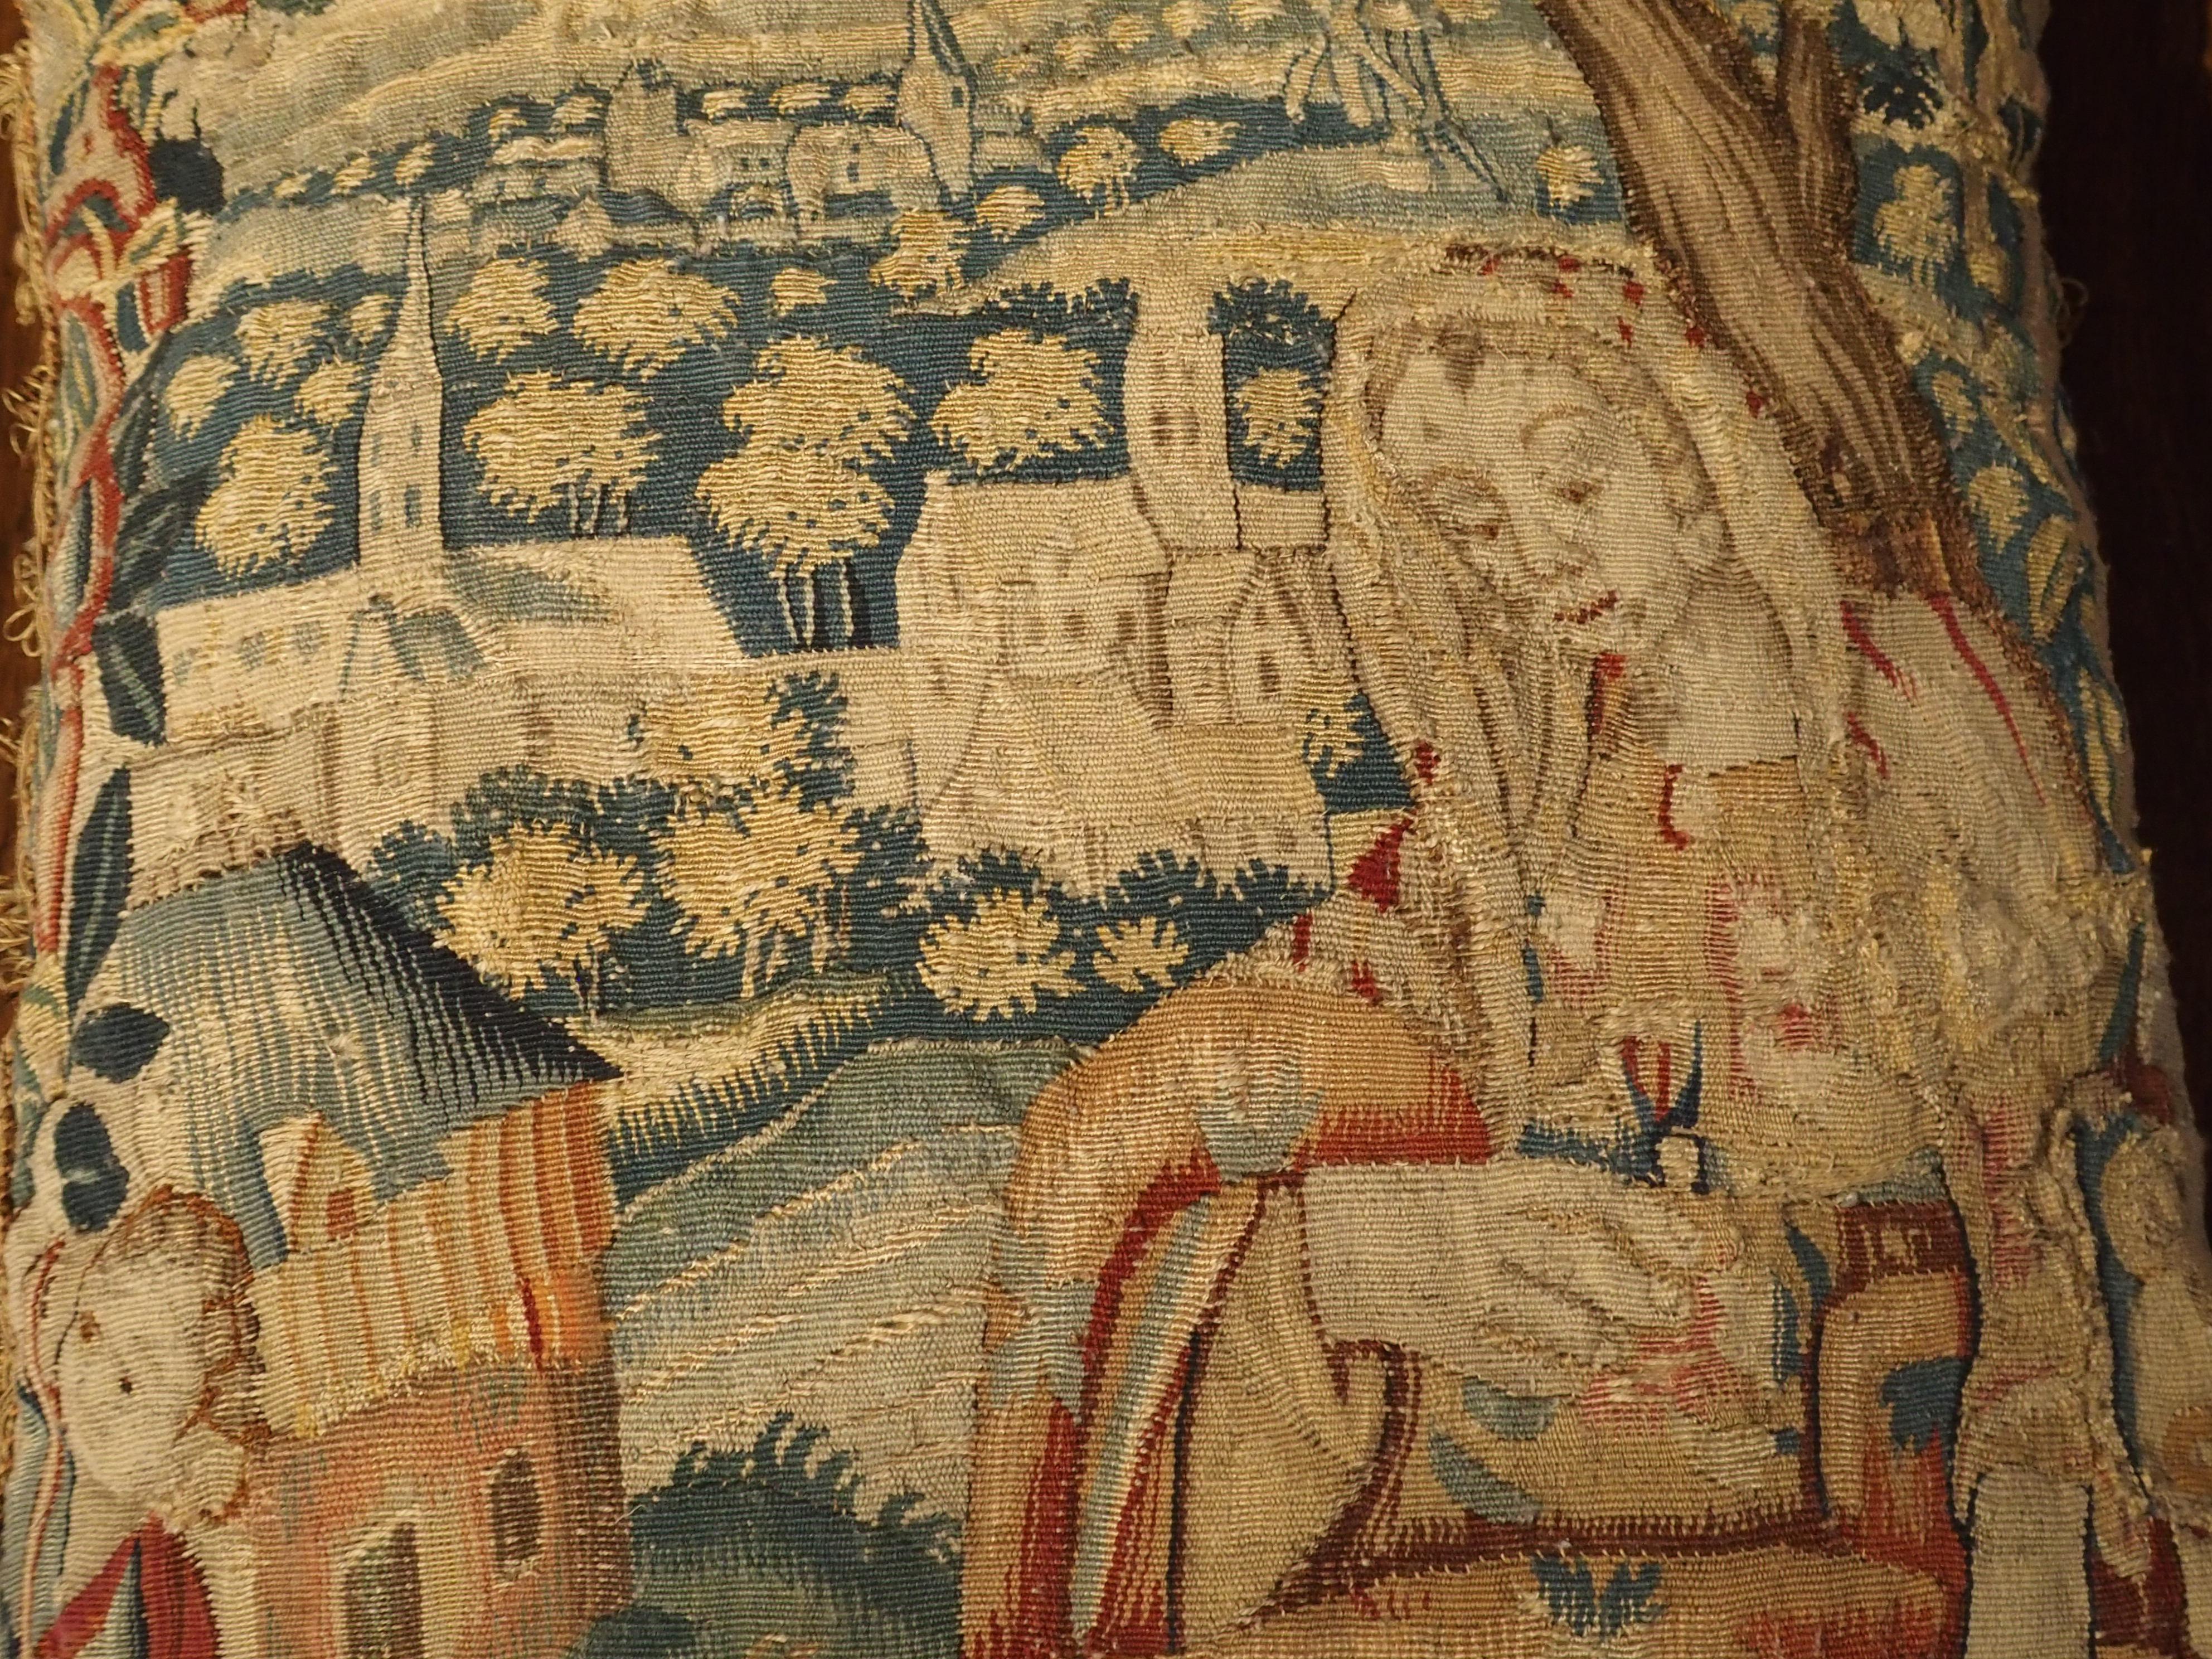 Hand-Woven 17th Century Tapestry Pillow from France